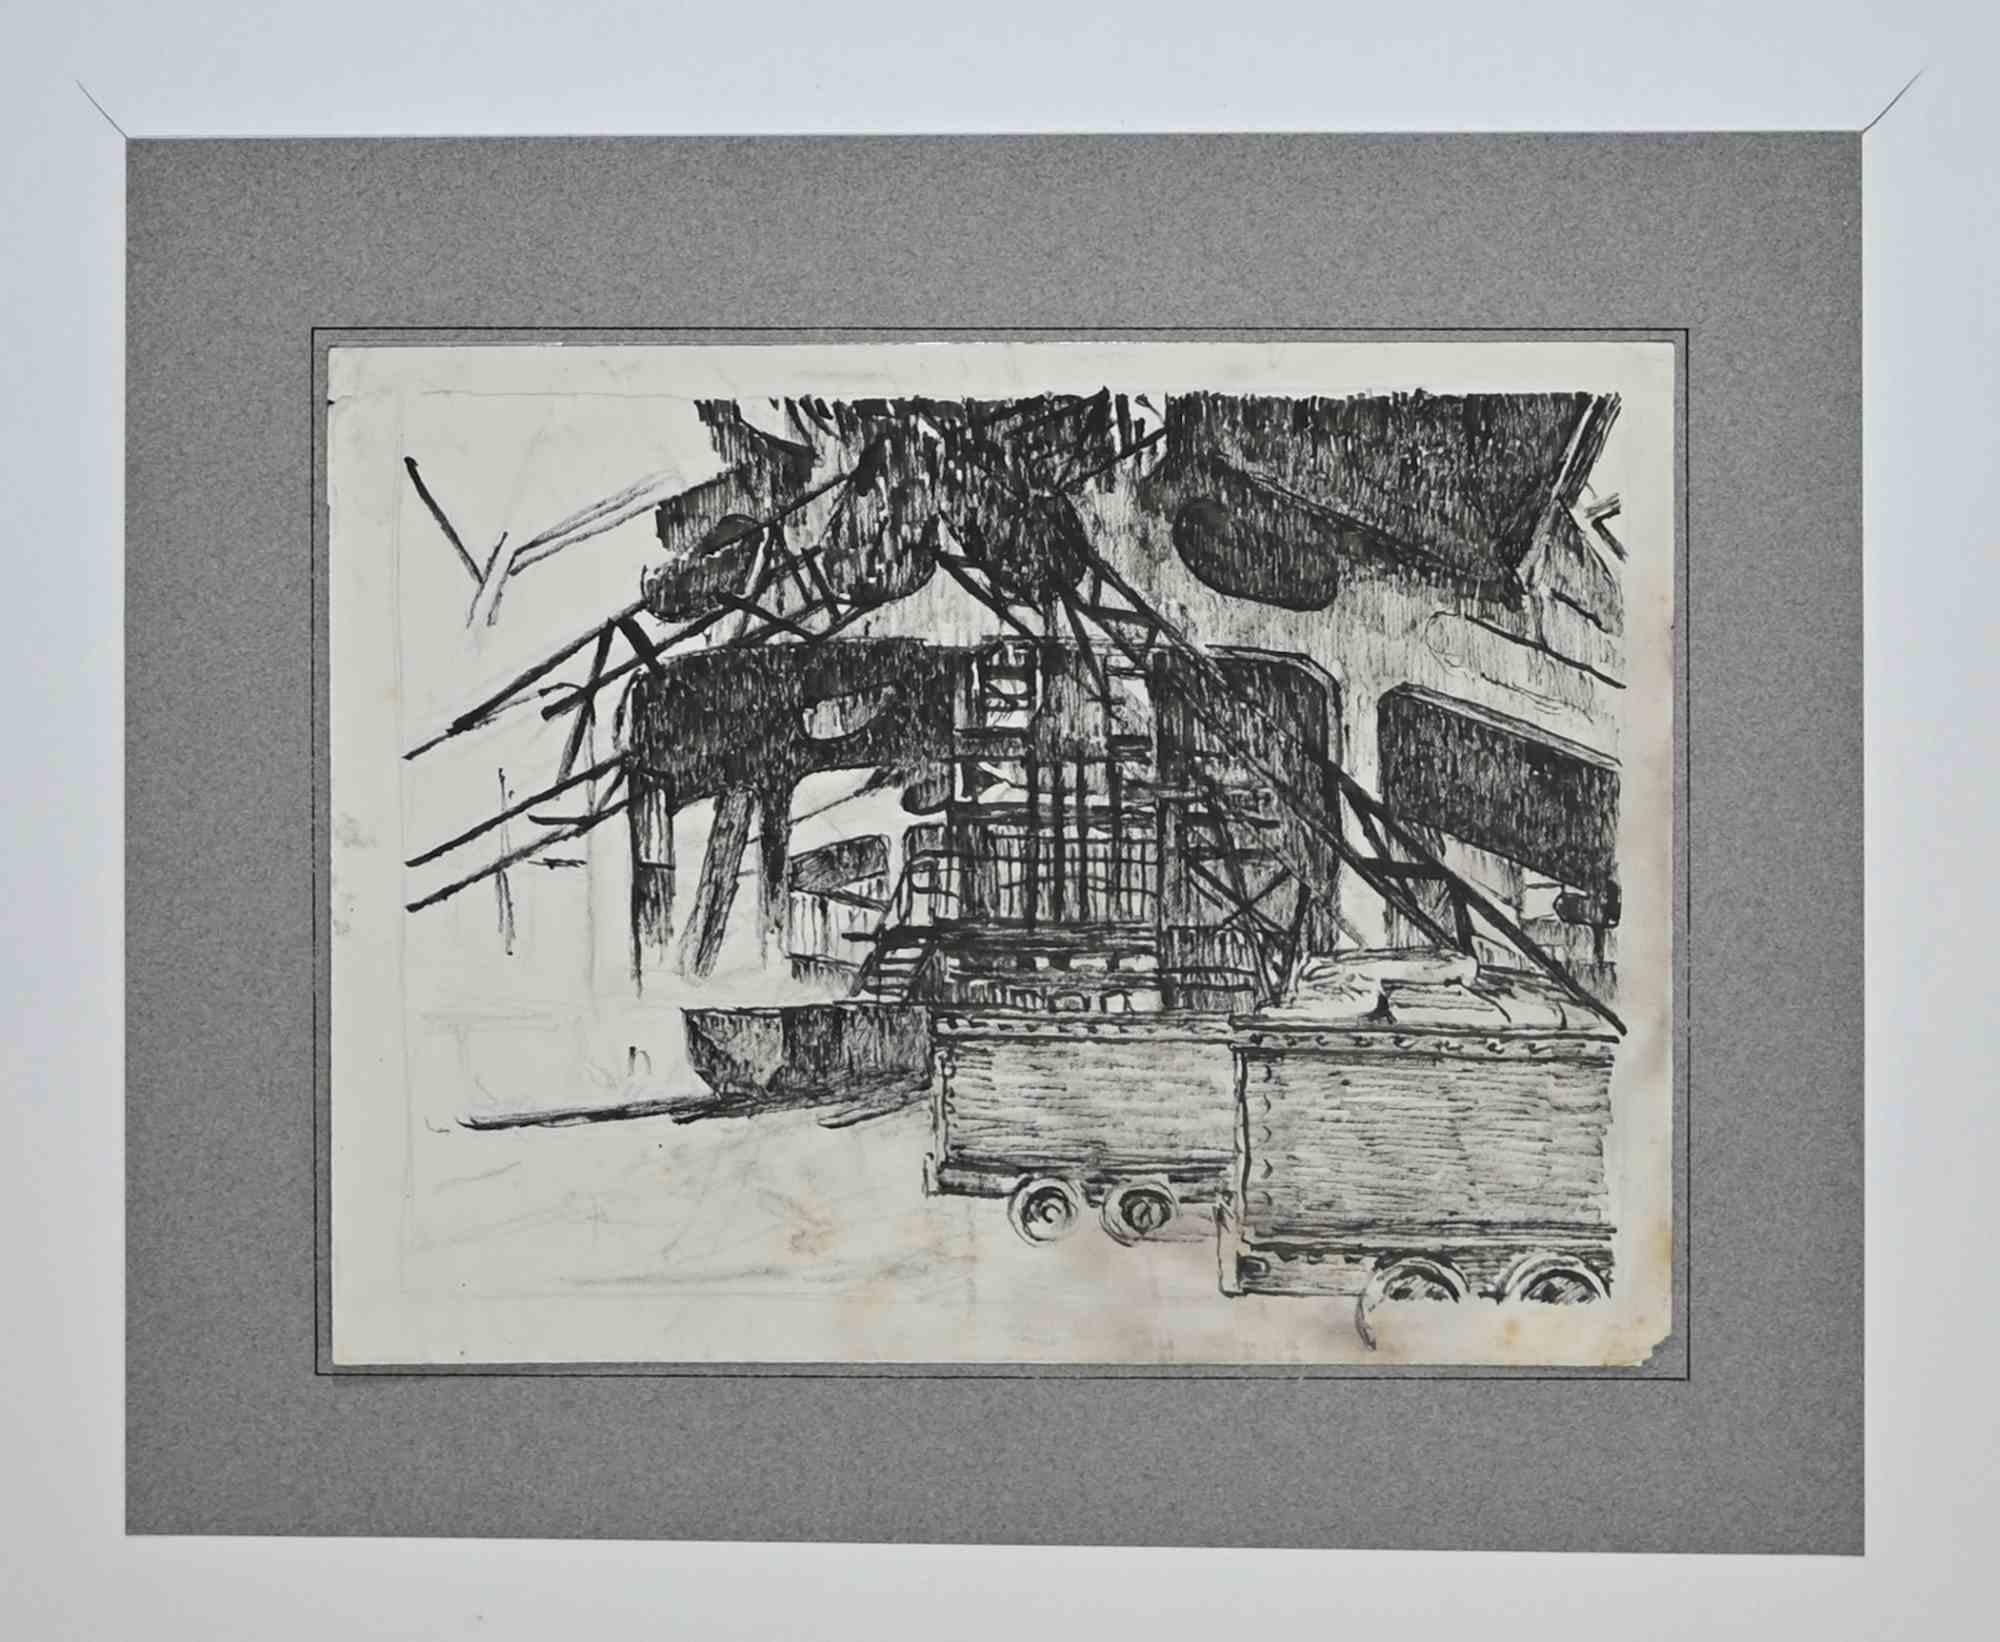 Unknown Figurative Art - Station - Original Drawing - Mid-20th Century